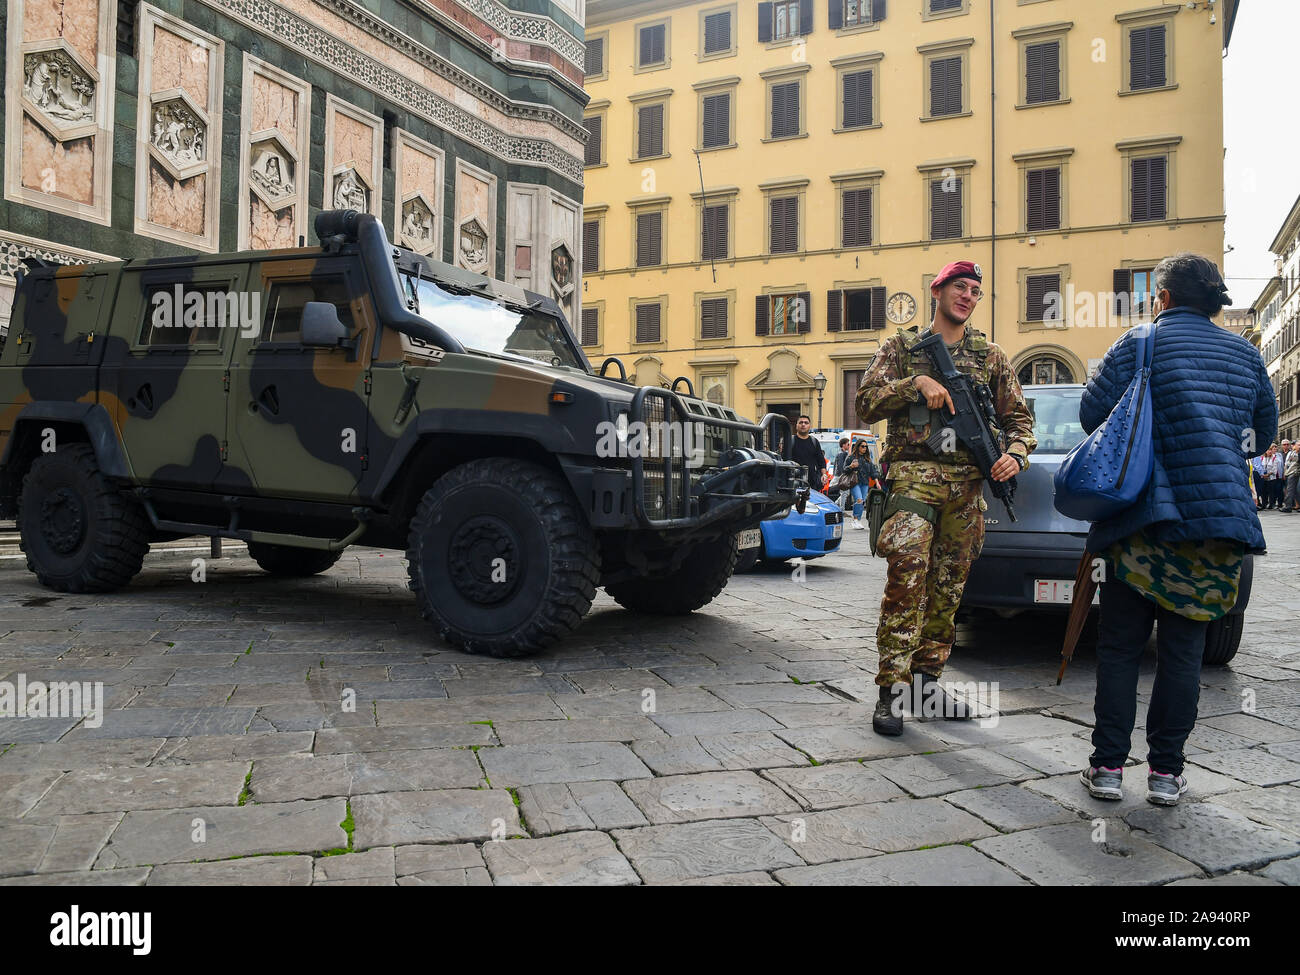 Iveco LMV military car in front of the Cathedral of Florence (Santa Maria del Fiore) with an armed soldier chatting with a lady, Tuscany, Italy Stock Photo